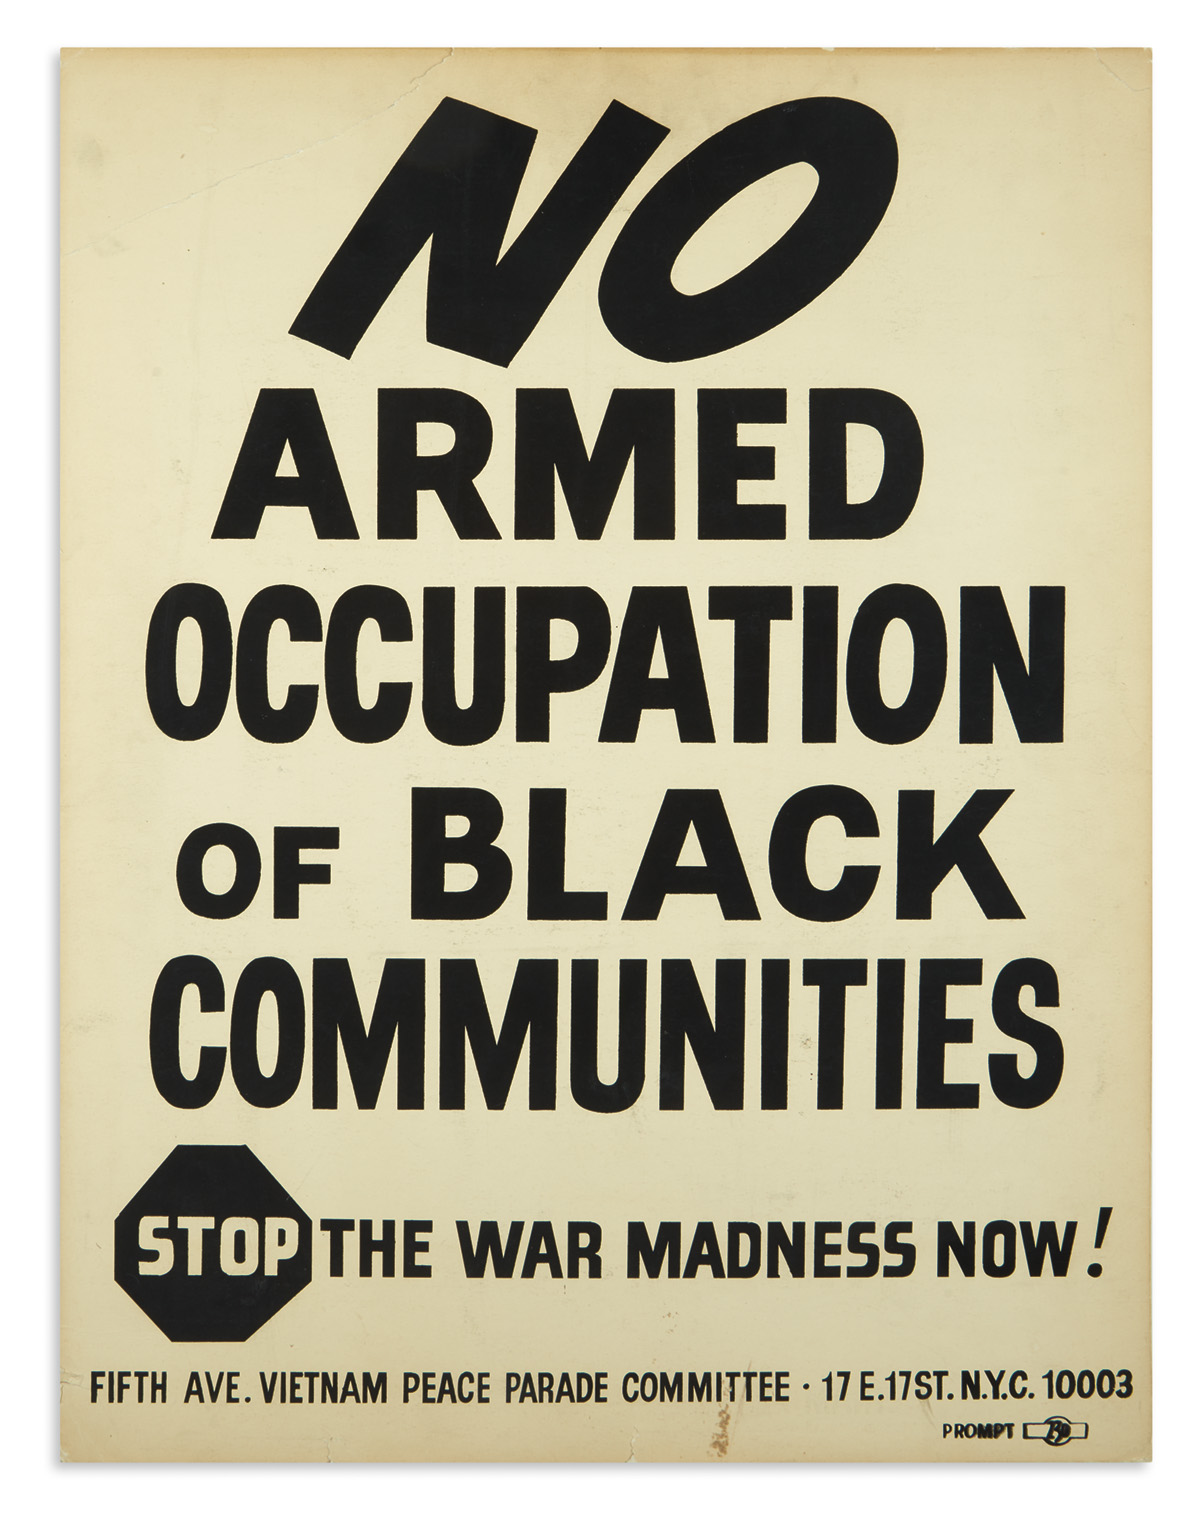 (CIVIL RIGHTS.) No Armed Occupation of Black Communities. Stop the War Madness Now!